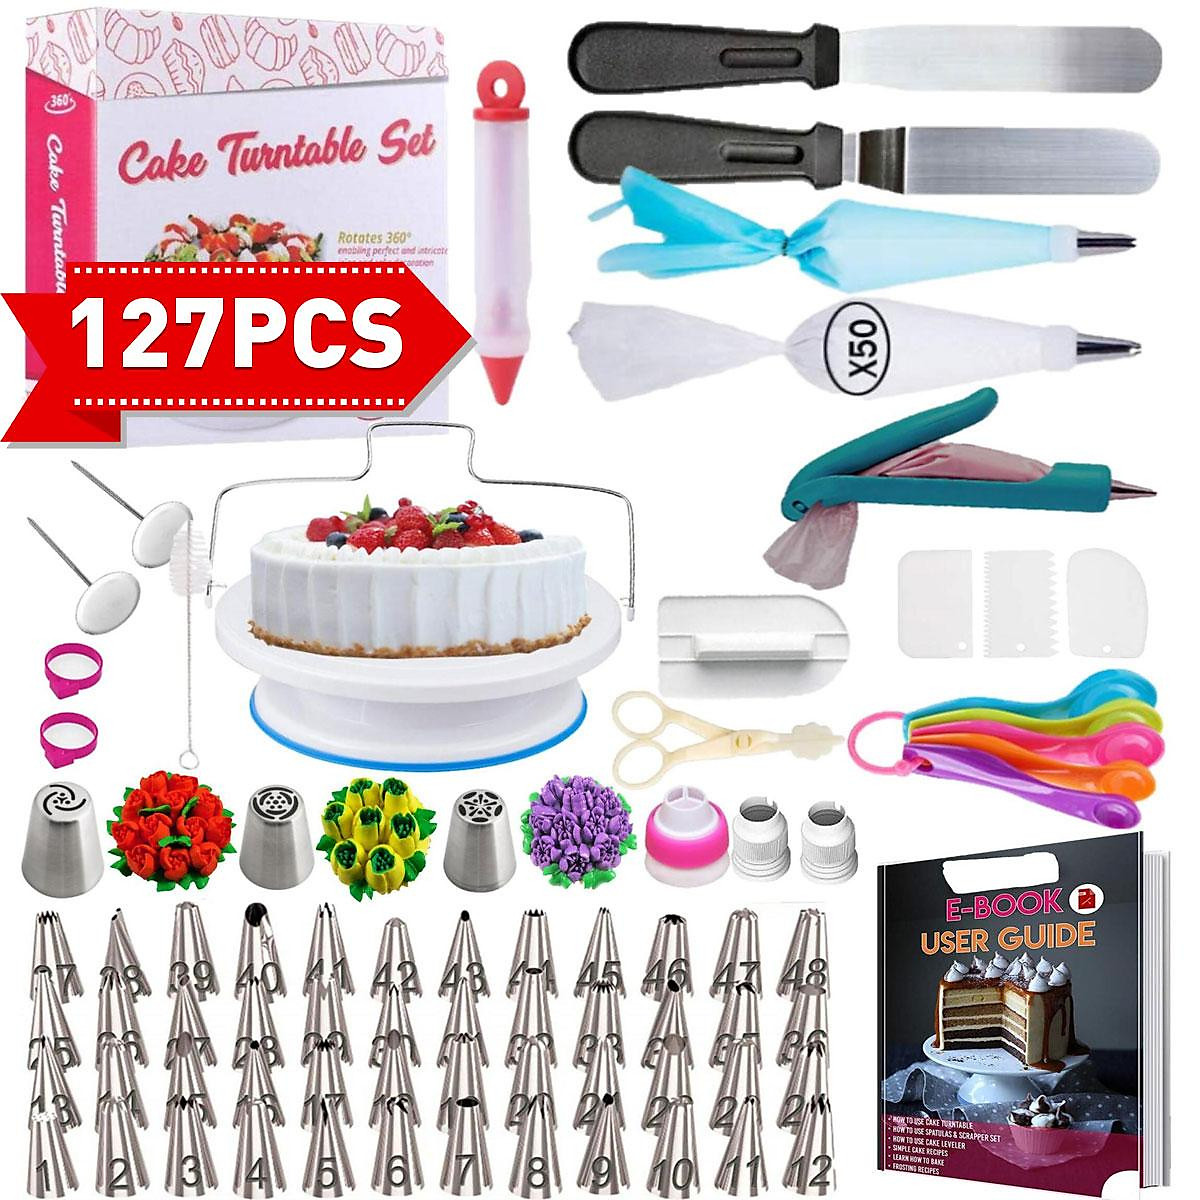 10 Best Cake Decorating Tools for Beginners, Cake Decorating Tools